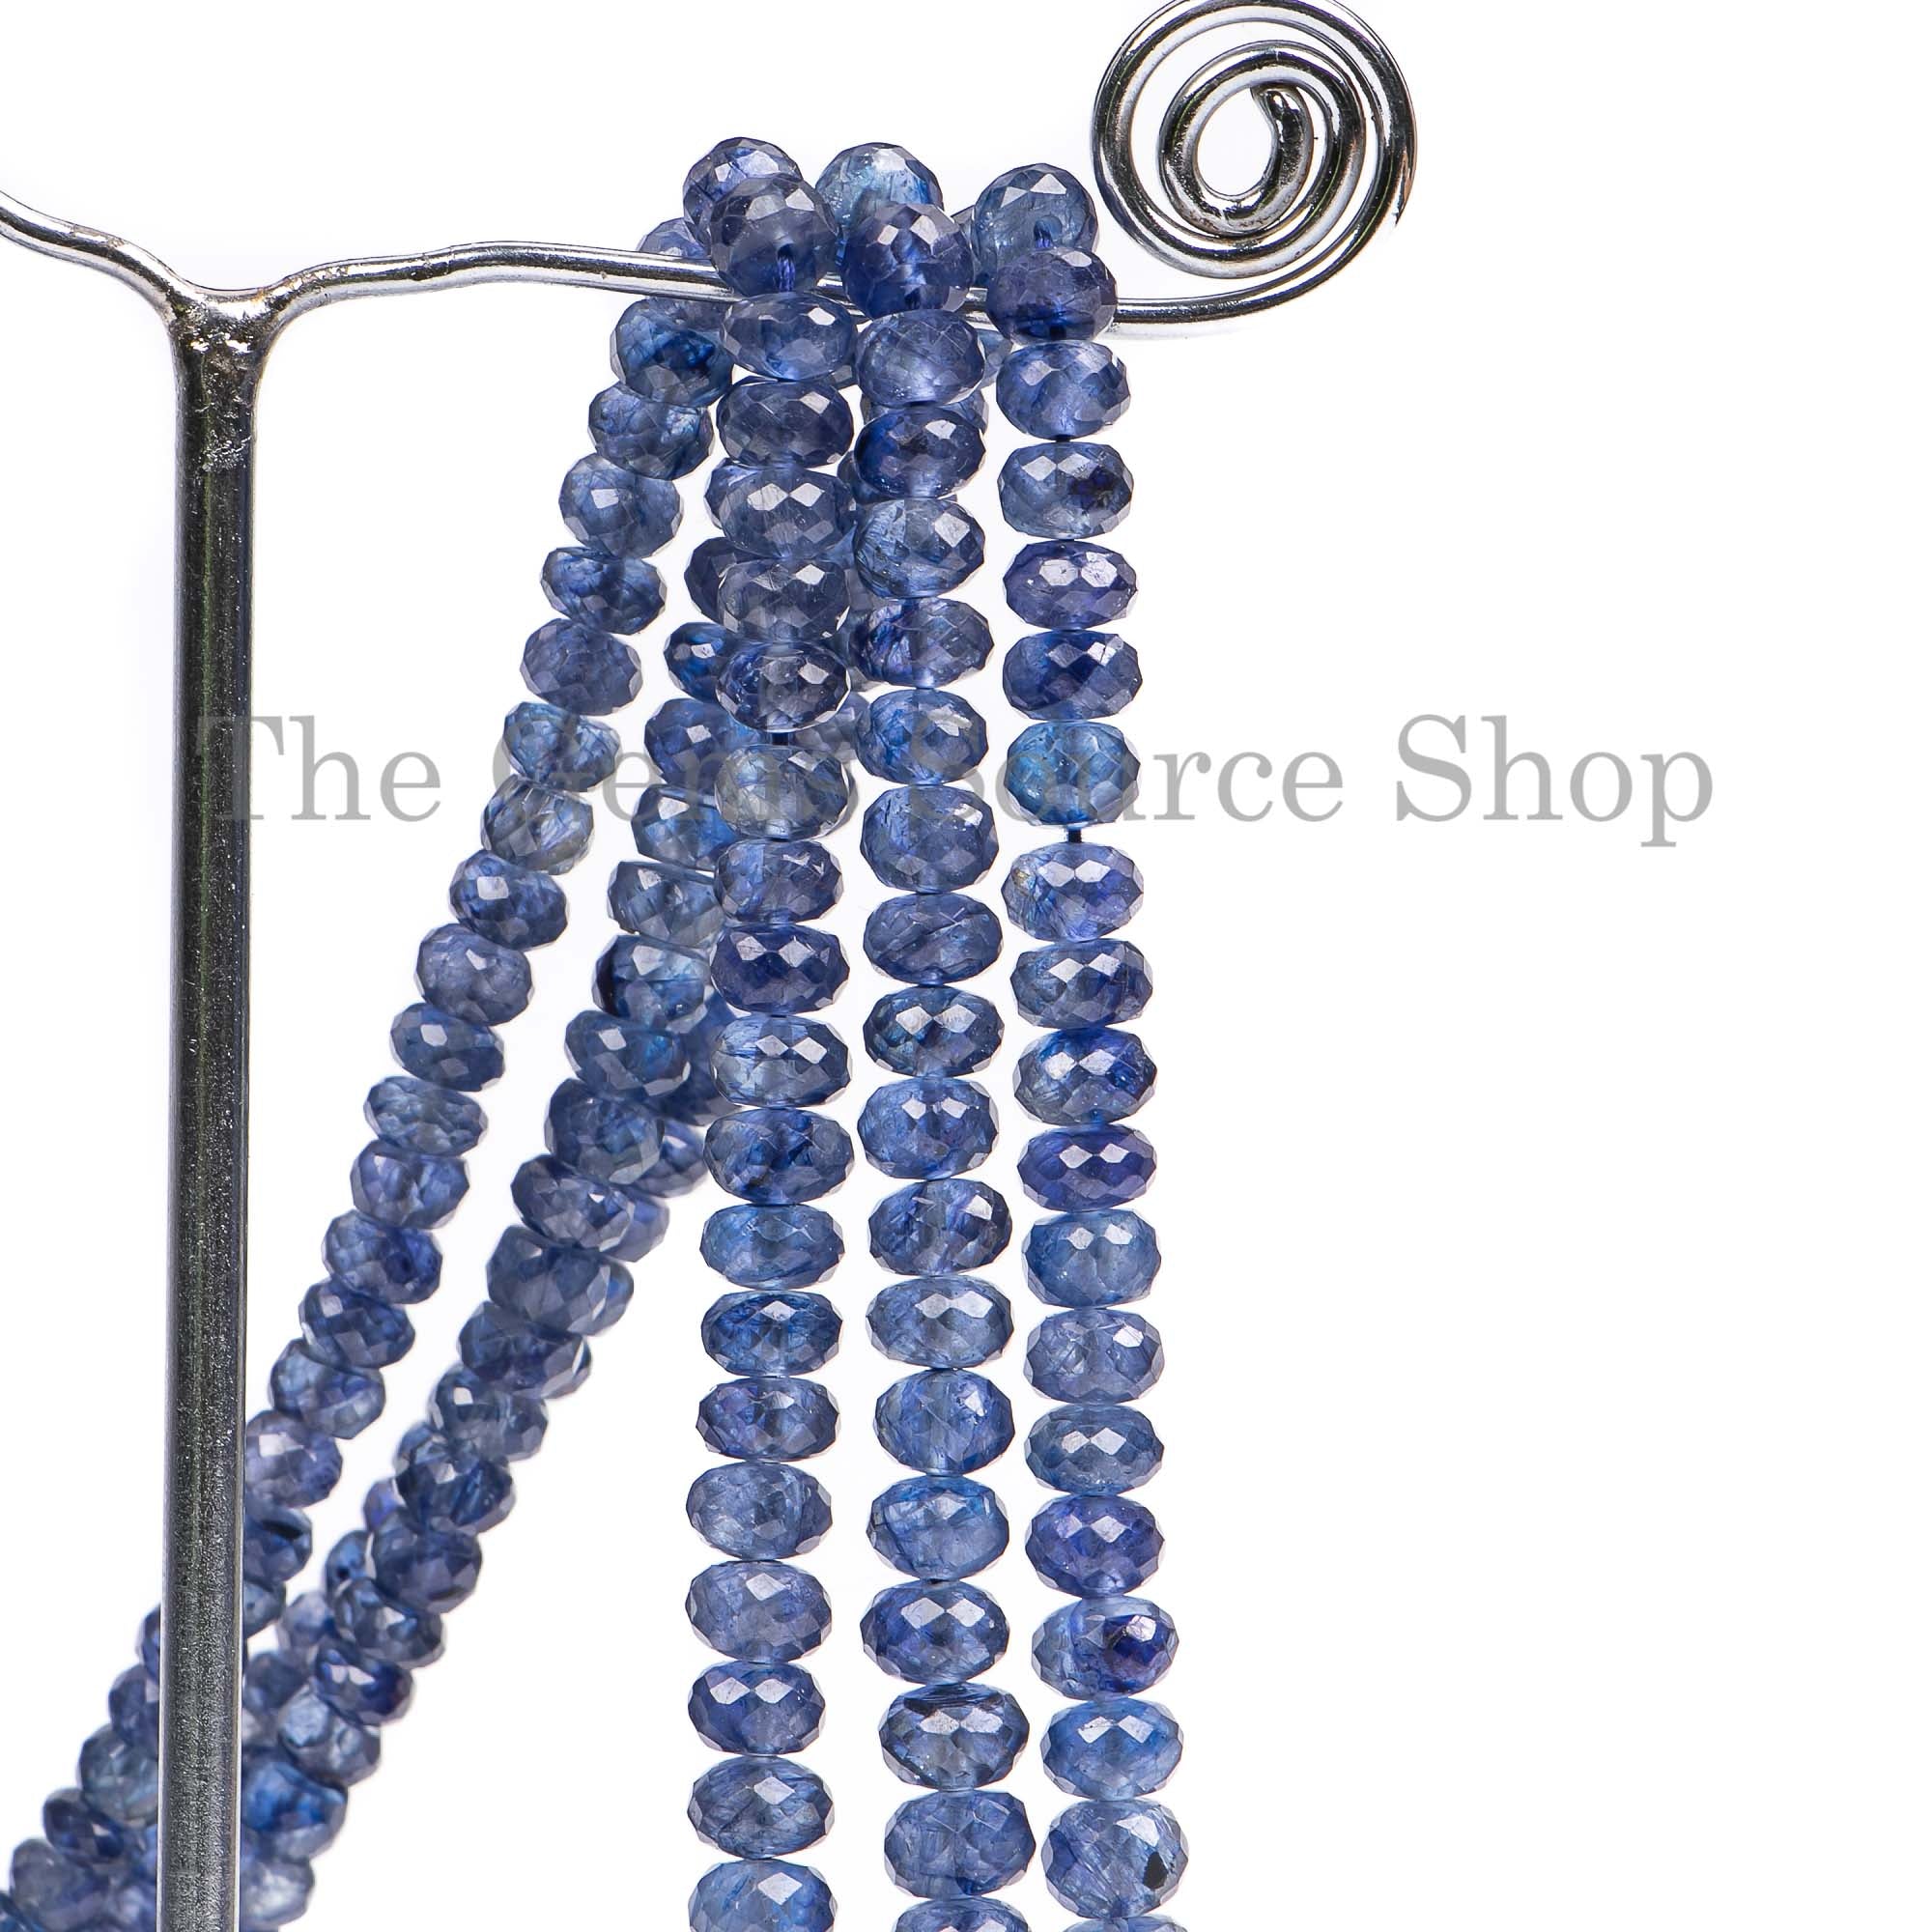 Top Quality Blue Sapphire Rondelle, Sapphire Beads, Faceted Rondelle Beads, Gemstone Beads